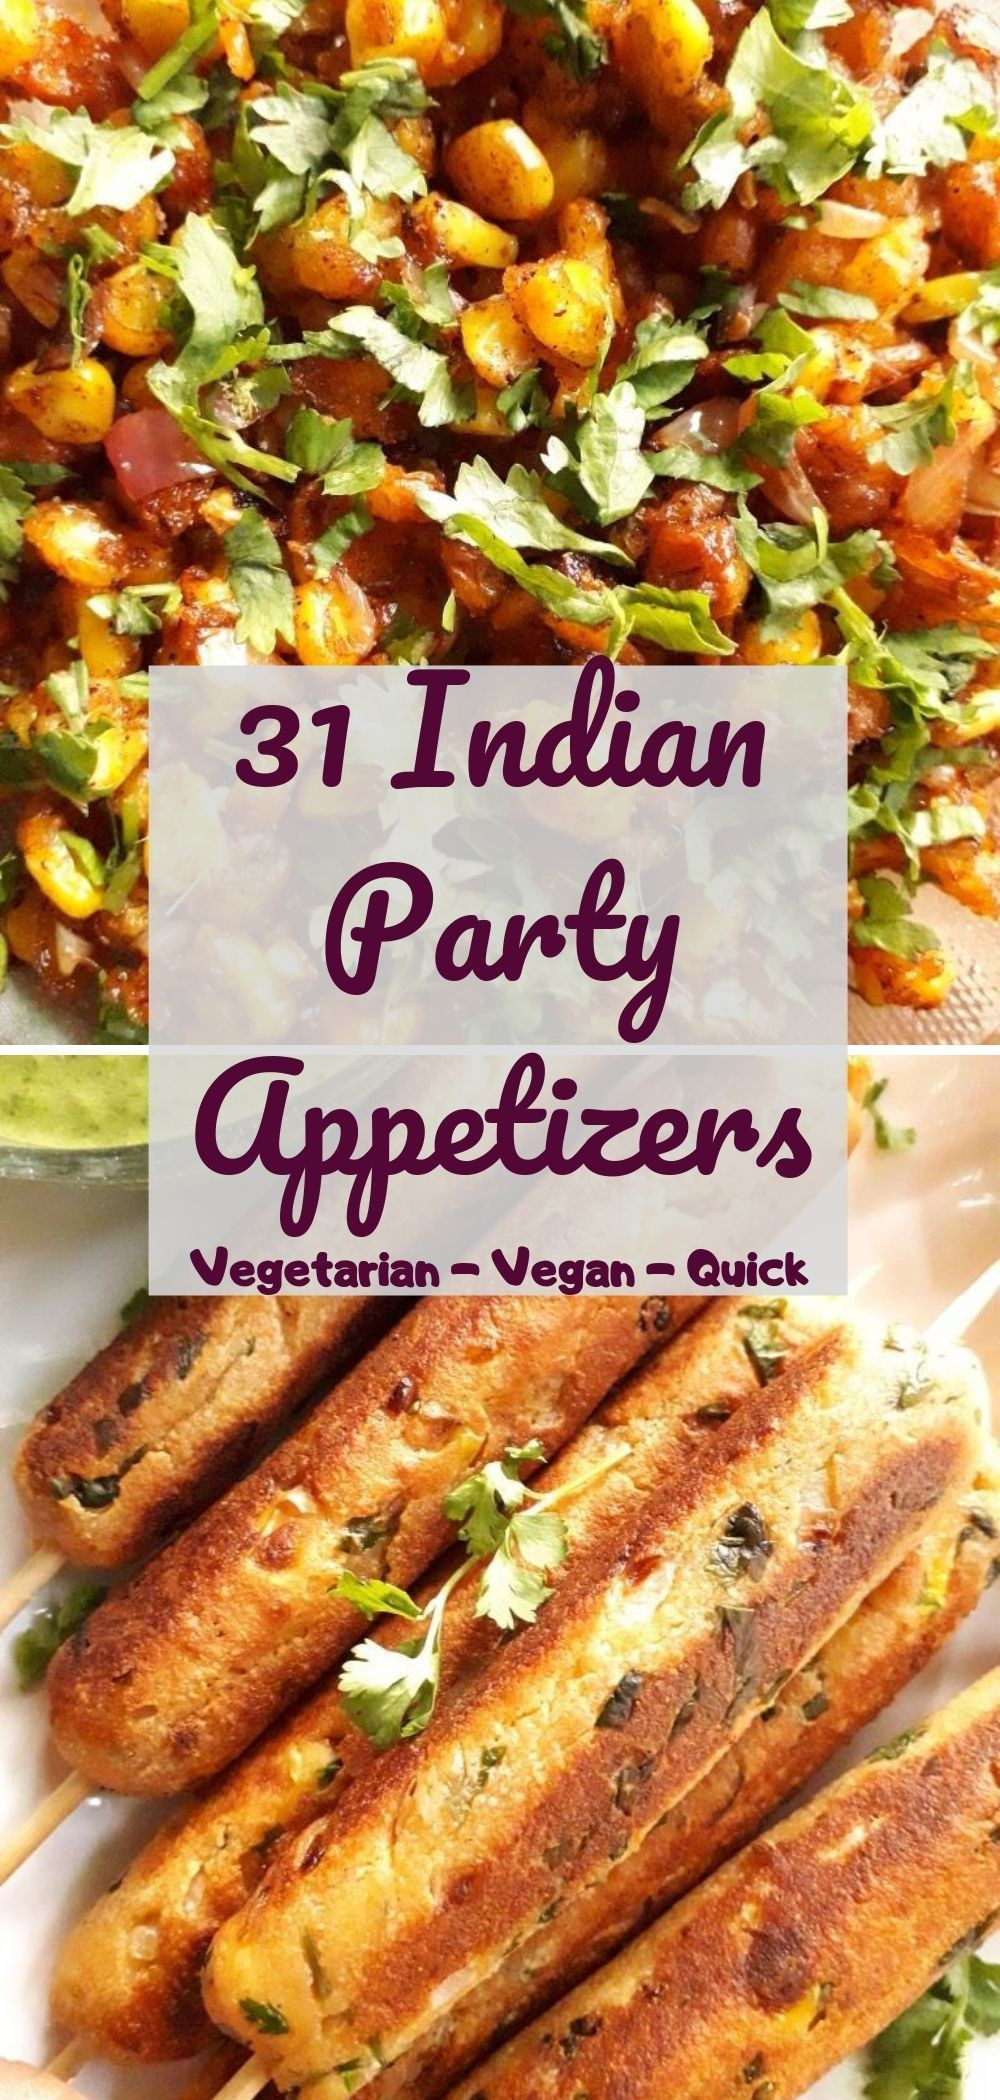 Vegan Indian Appetizers
 Get recipes of 31 Quick & easy Indian party appetizers